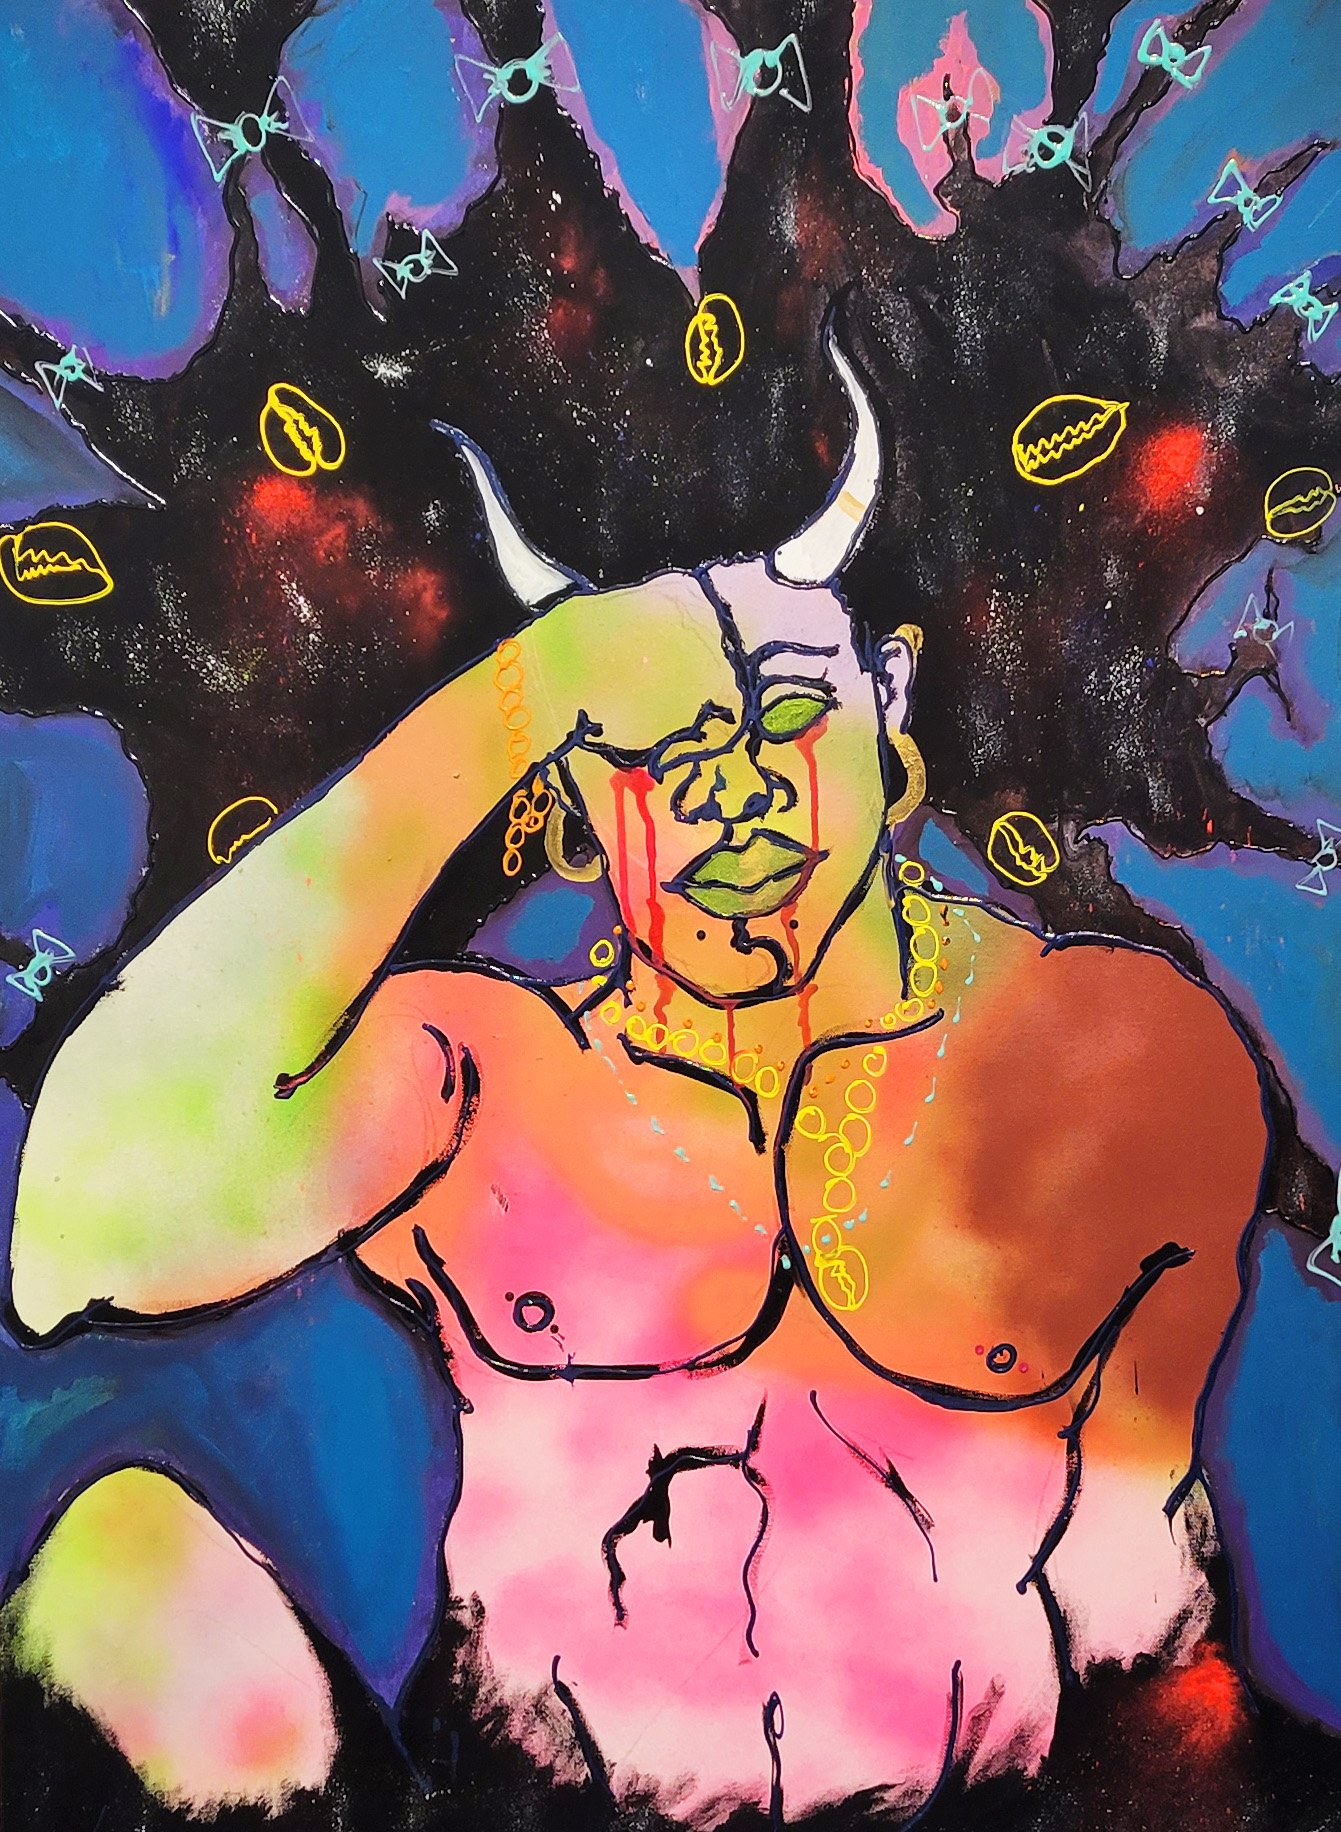   Tender-Headed Devil   2022  Acrylic, spray-paint, puffy paint, pigment, and ink, on canvas 